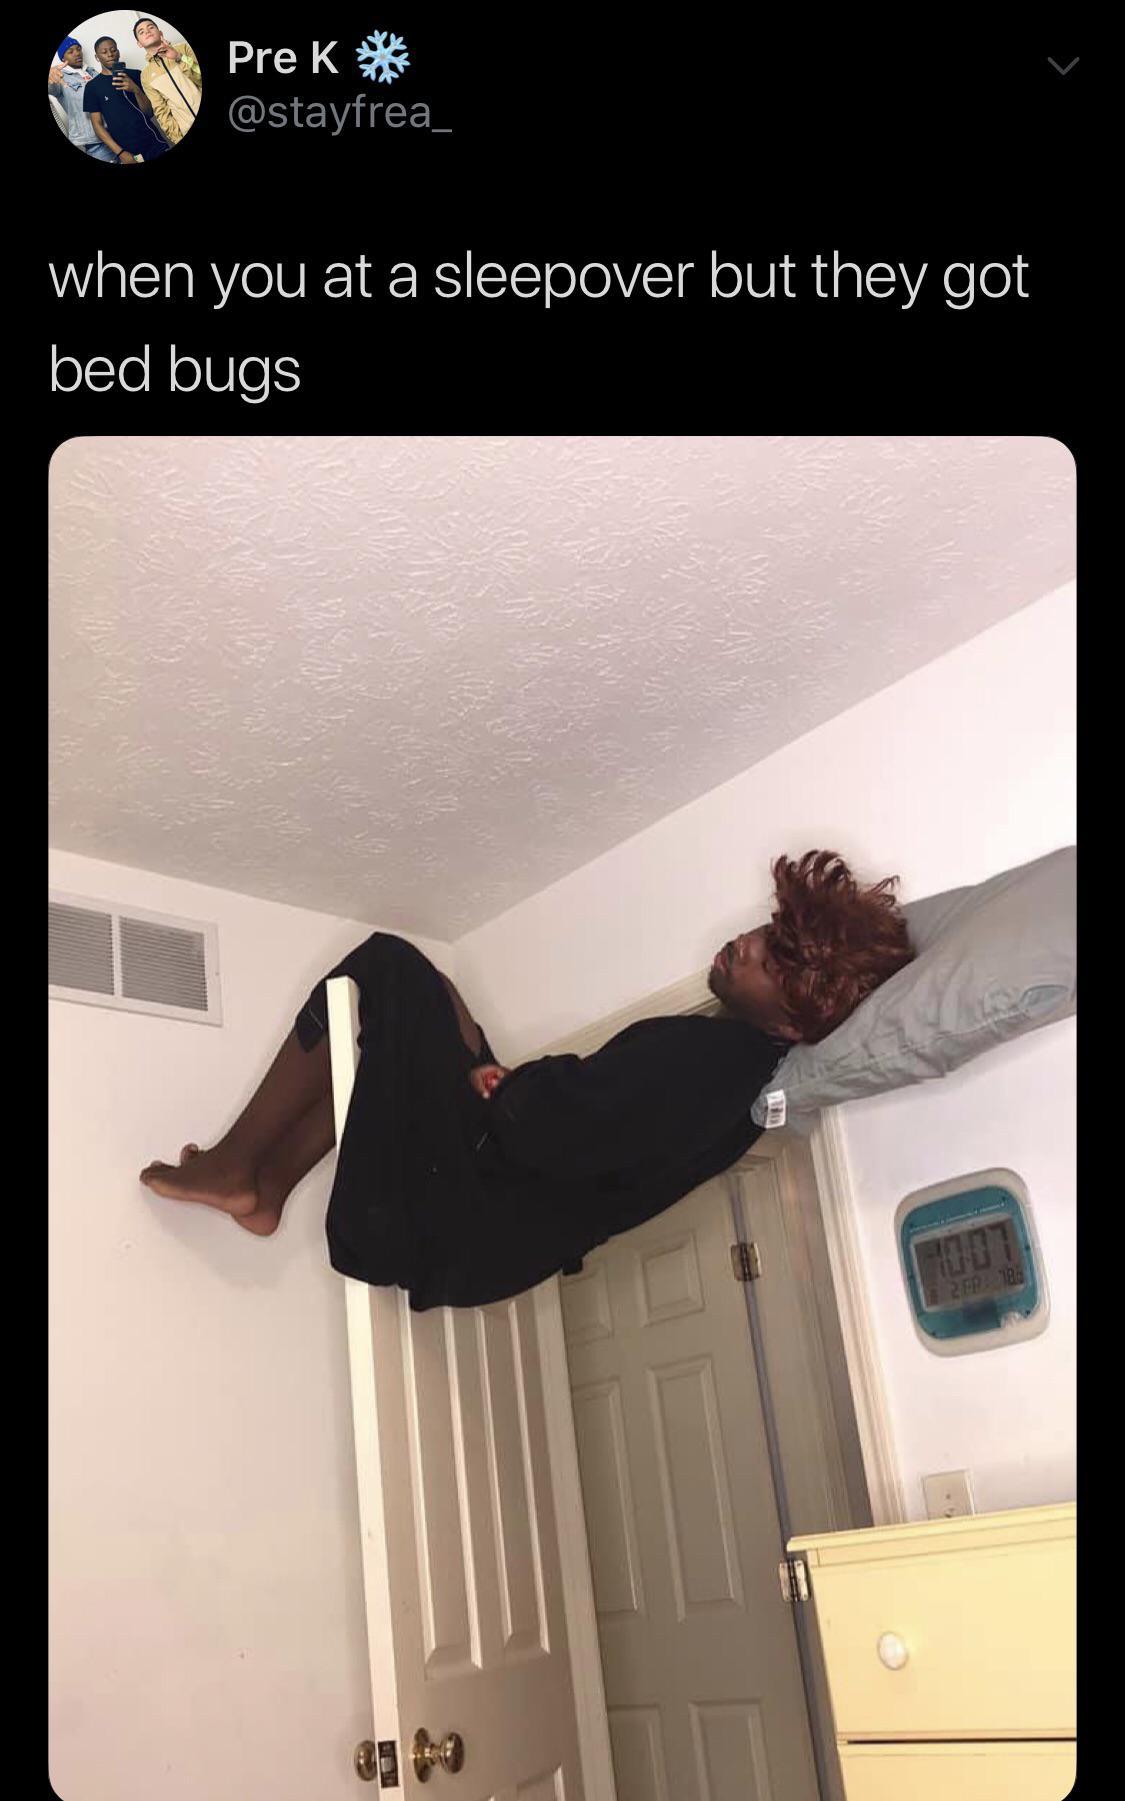 Humour - Pre K when you at a sleepover but they got bed bugs